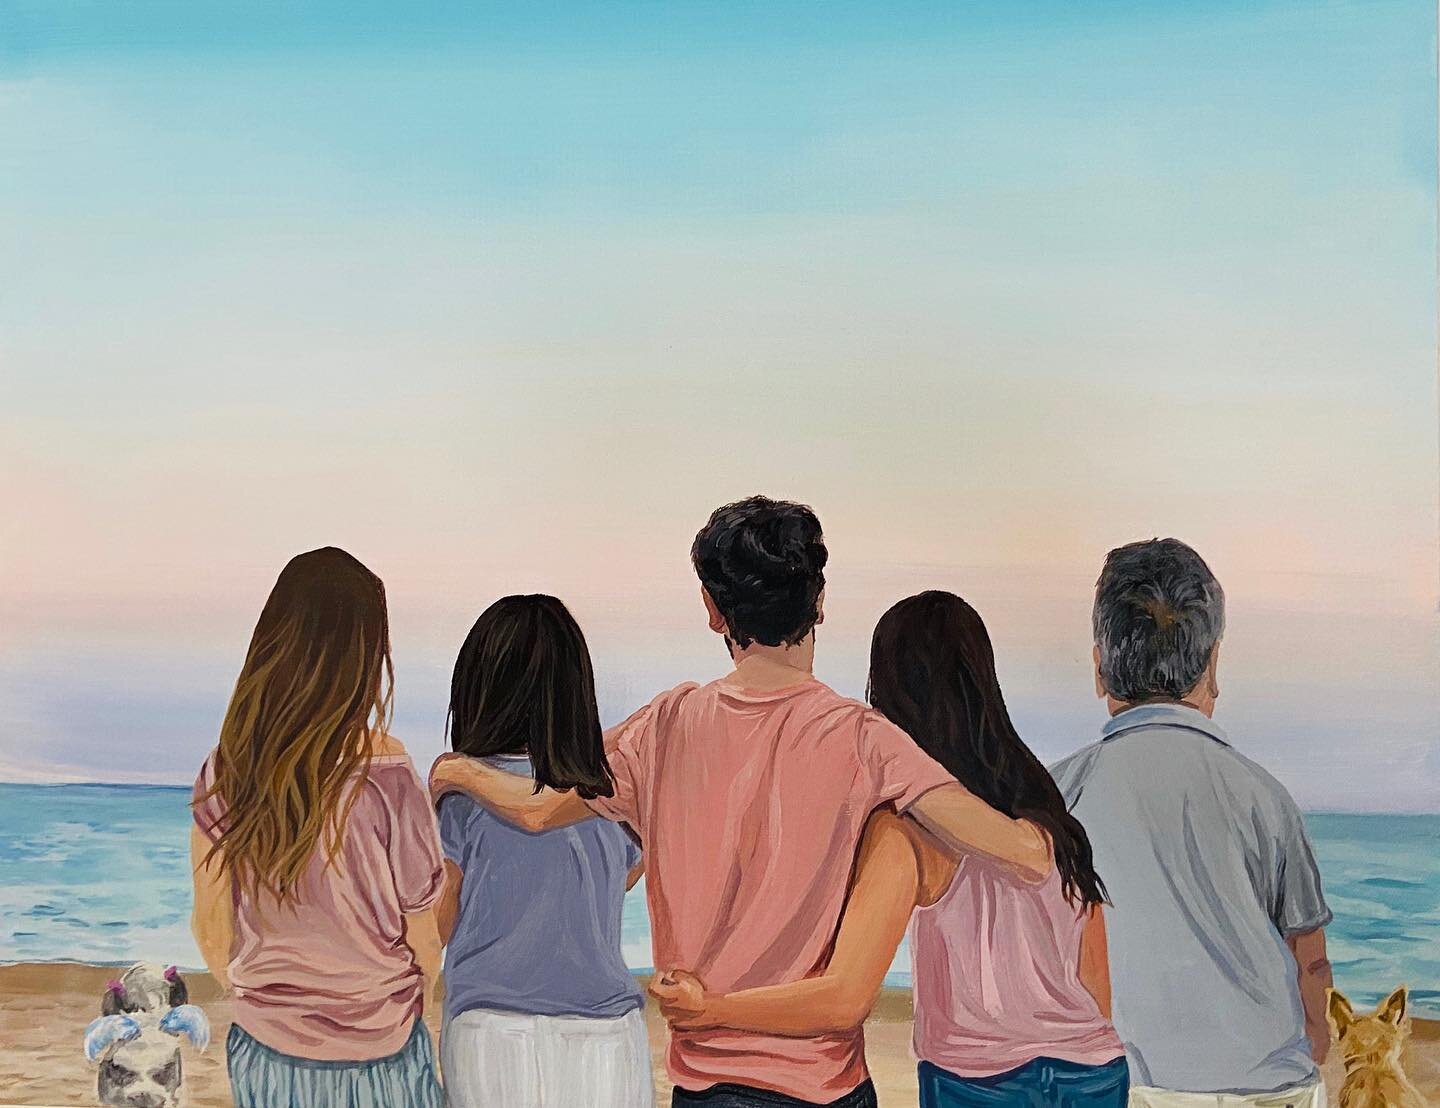 This weekend, I painted a family I&rsquo;ve known since I was twelve&mdash;it&rsquo;s my husband with his mom, dad, sisters and pets. ❤️🎨⁣
⁣
Part of what makes this painting so tender to me, is that they lost their darling shih-tzu, Mia, unexpectedl